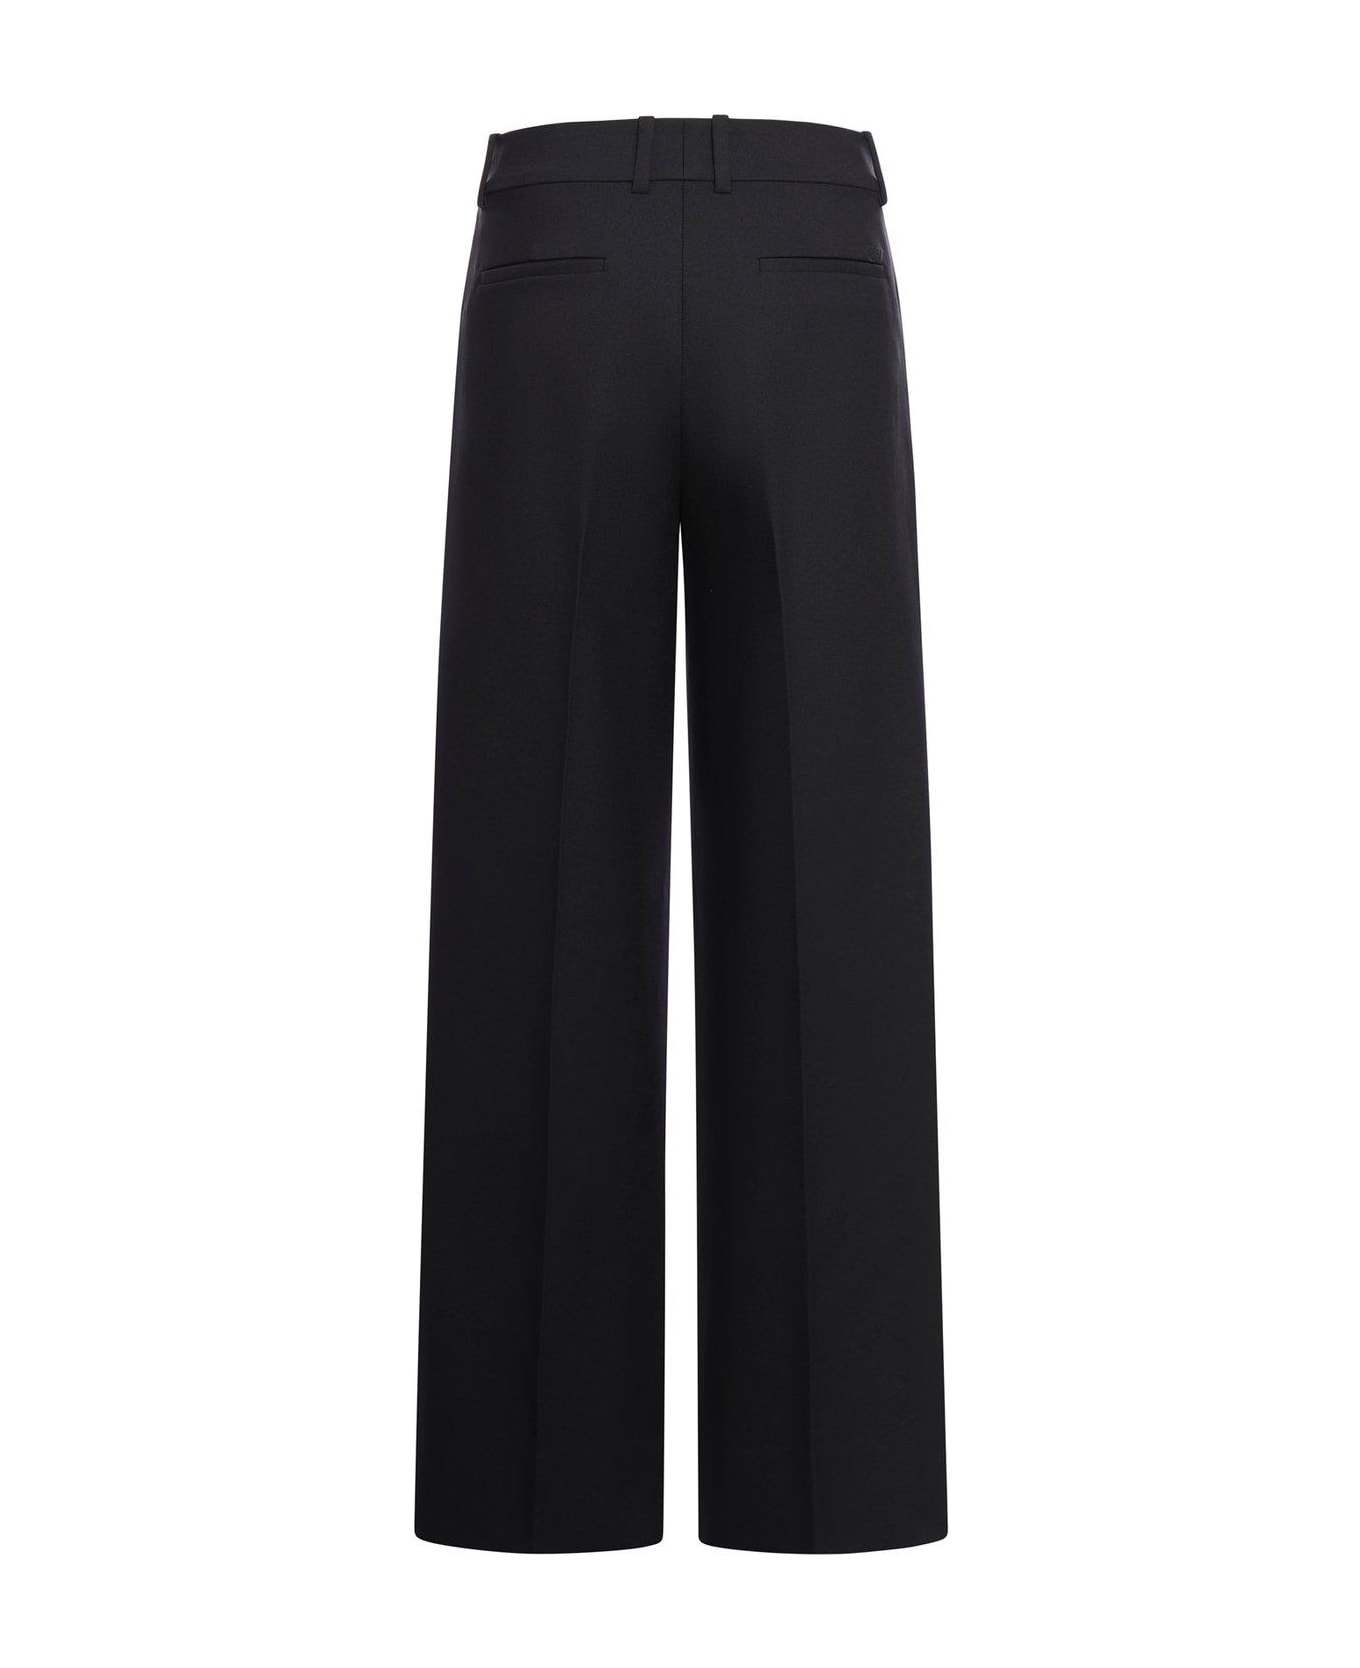 Off-White High-waisted Wide-leg Trousers - Black ボトムス